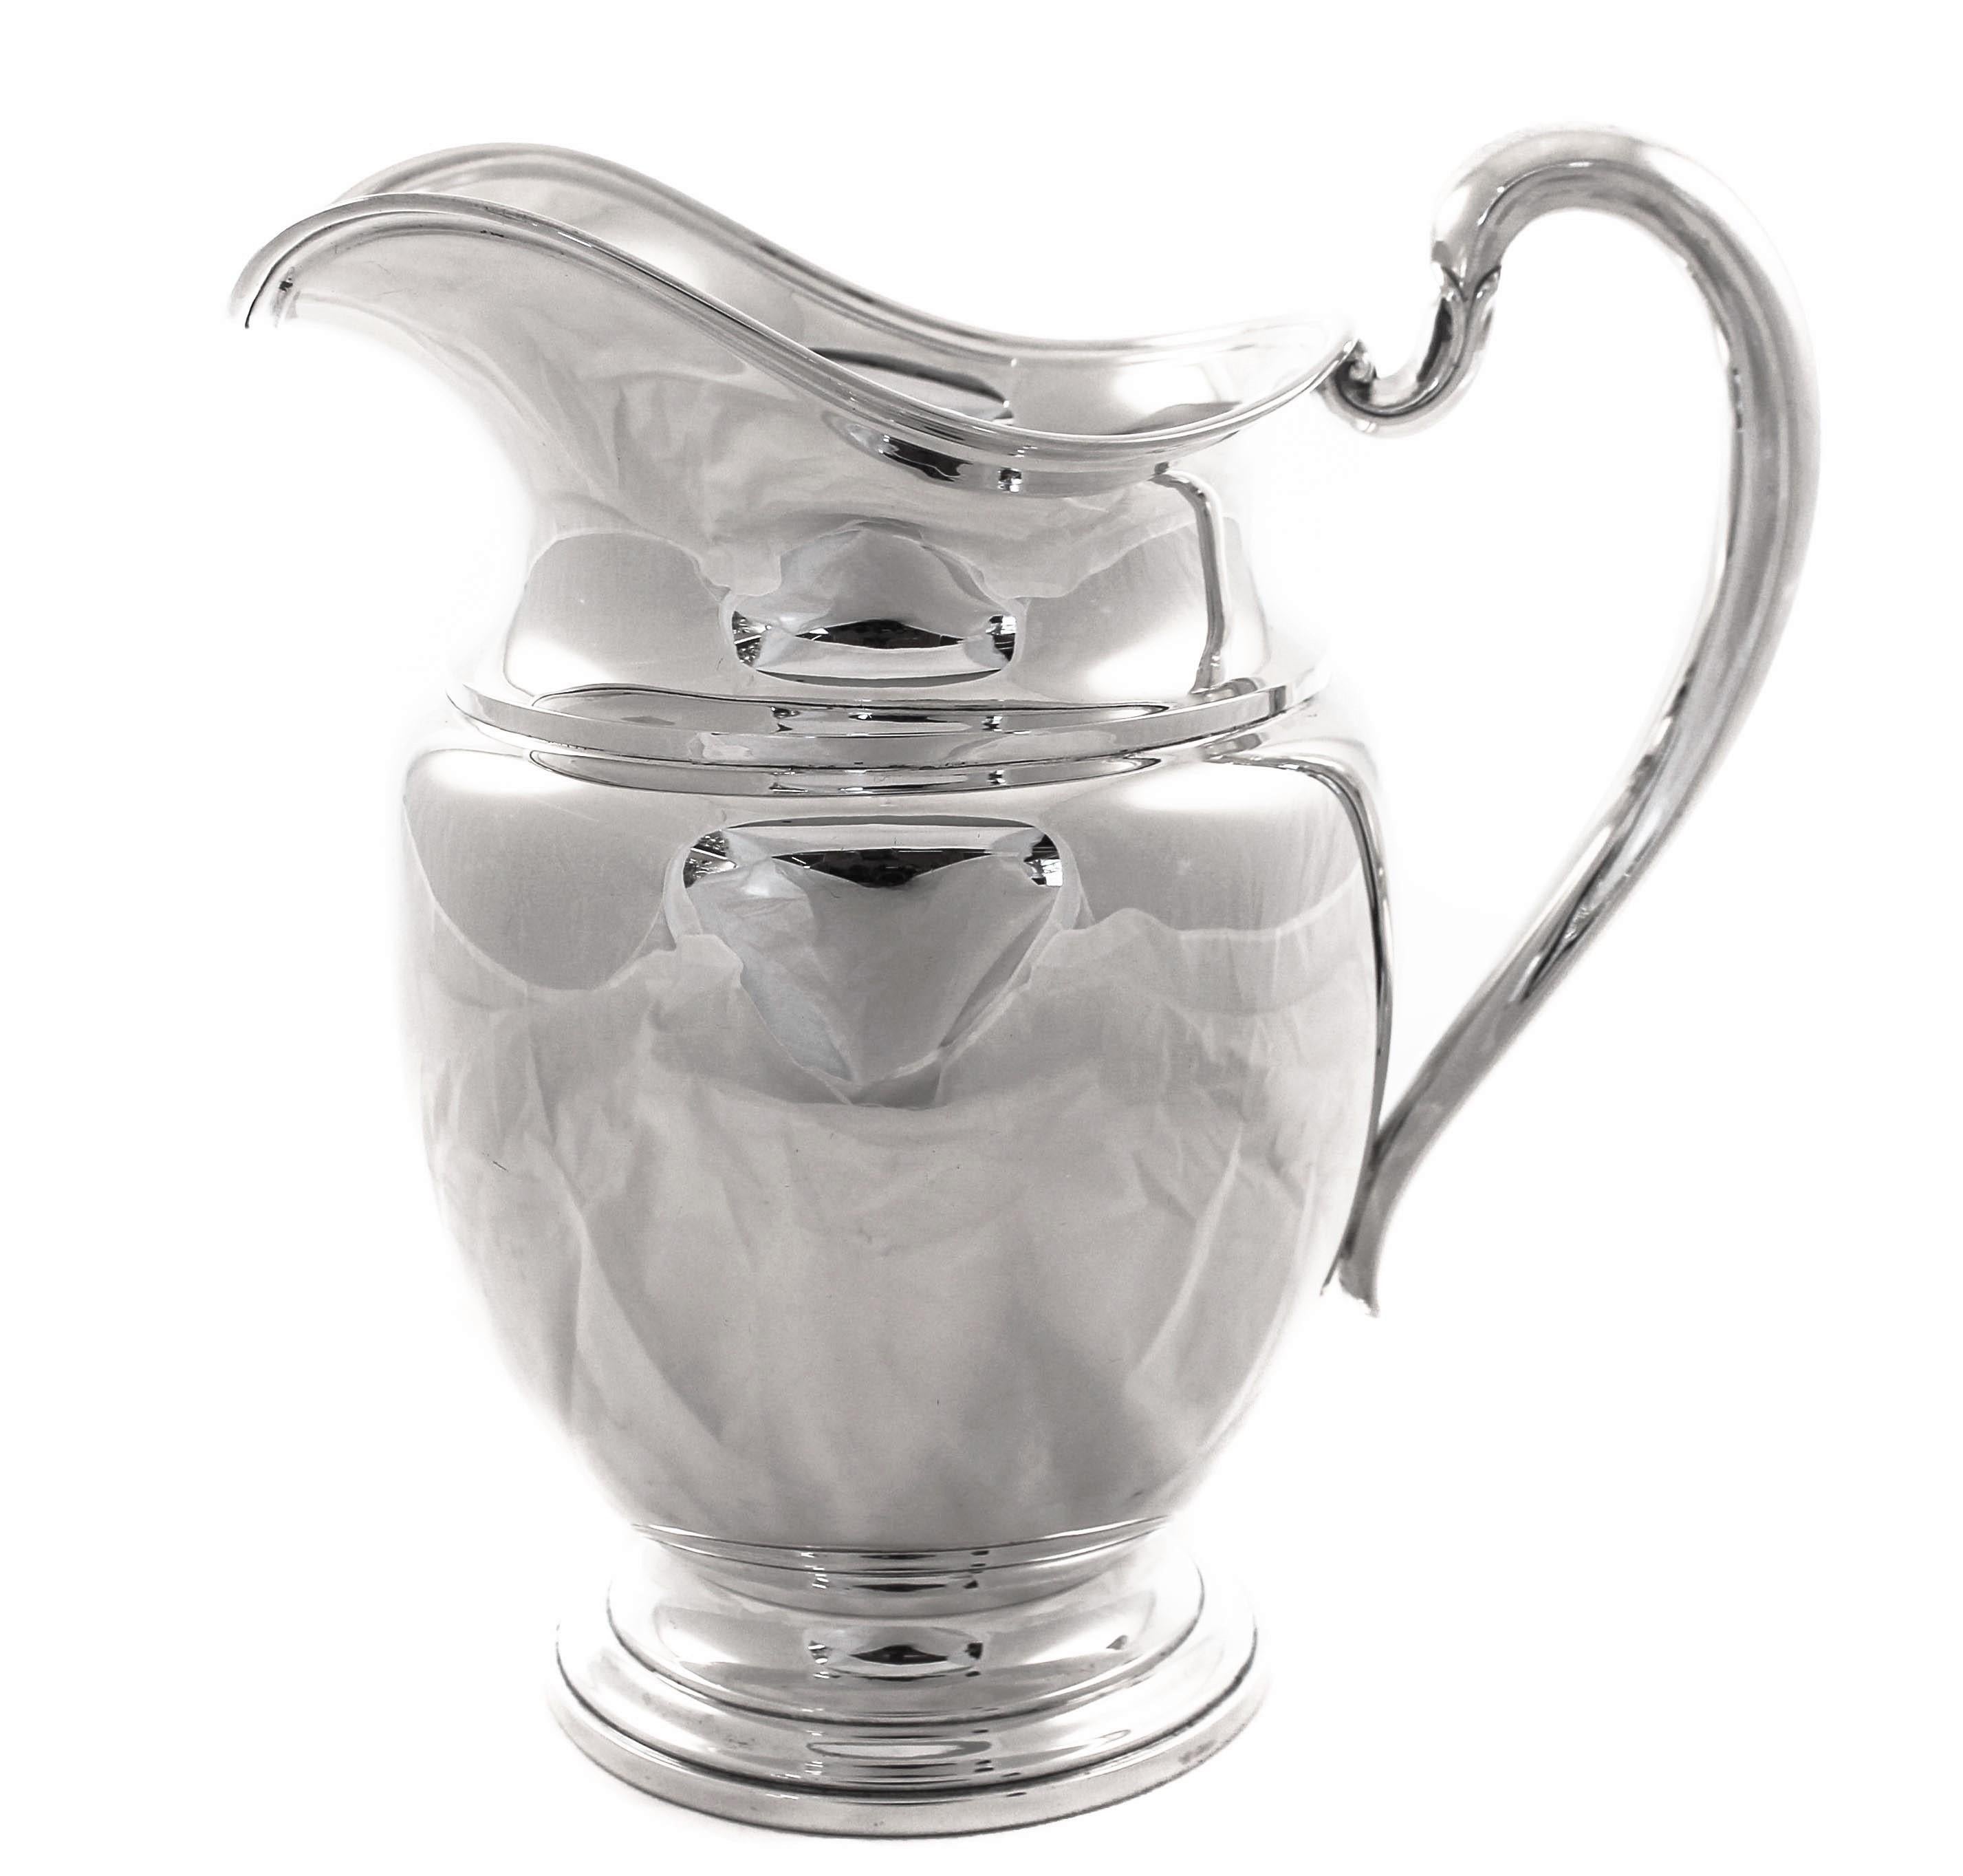 American, sterling, excellent, international sterling, 1943, 9” tall x 6.5” top, $3400
We are proud to offer this pair of sterling silver water pitchers by International Silver from 1943. We rarely see pairs of water pitchers, that’s why we are so